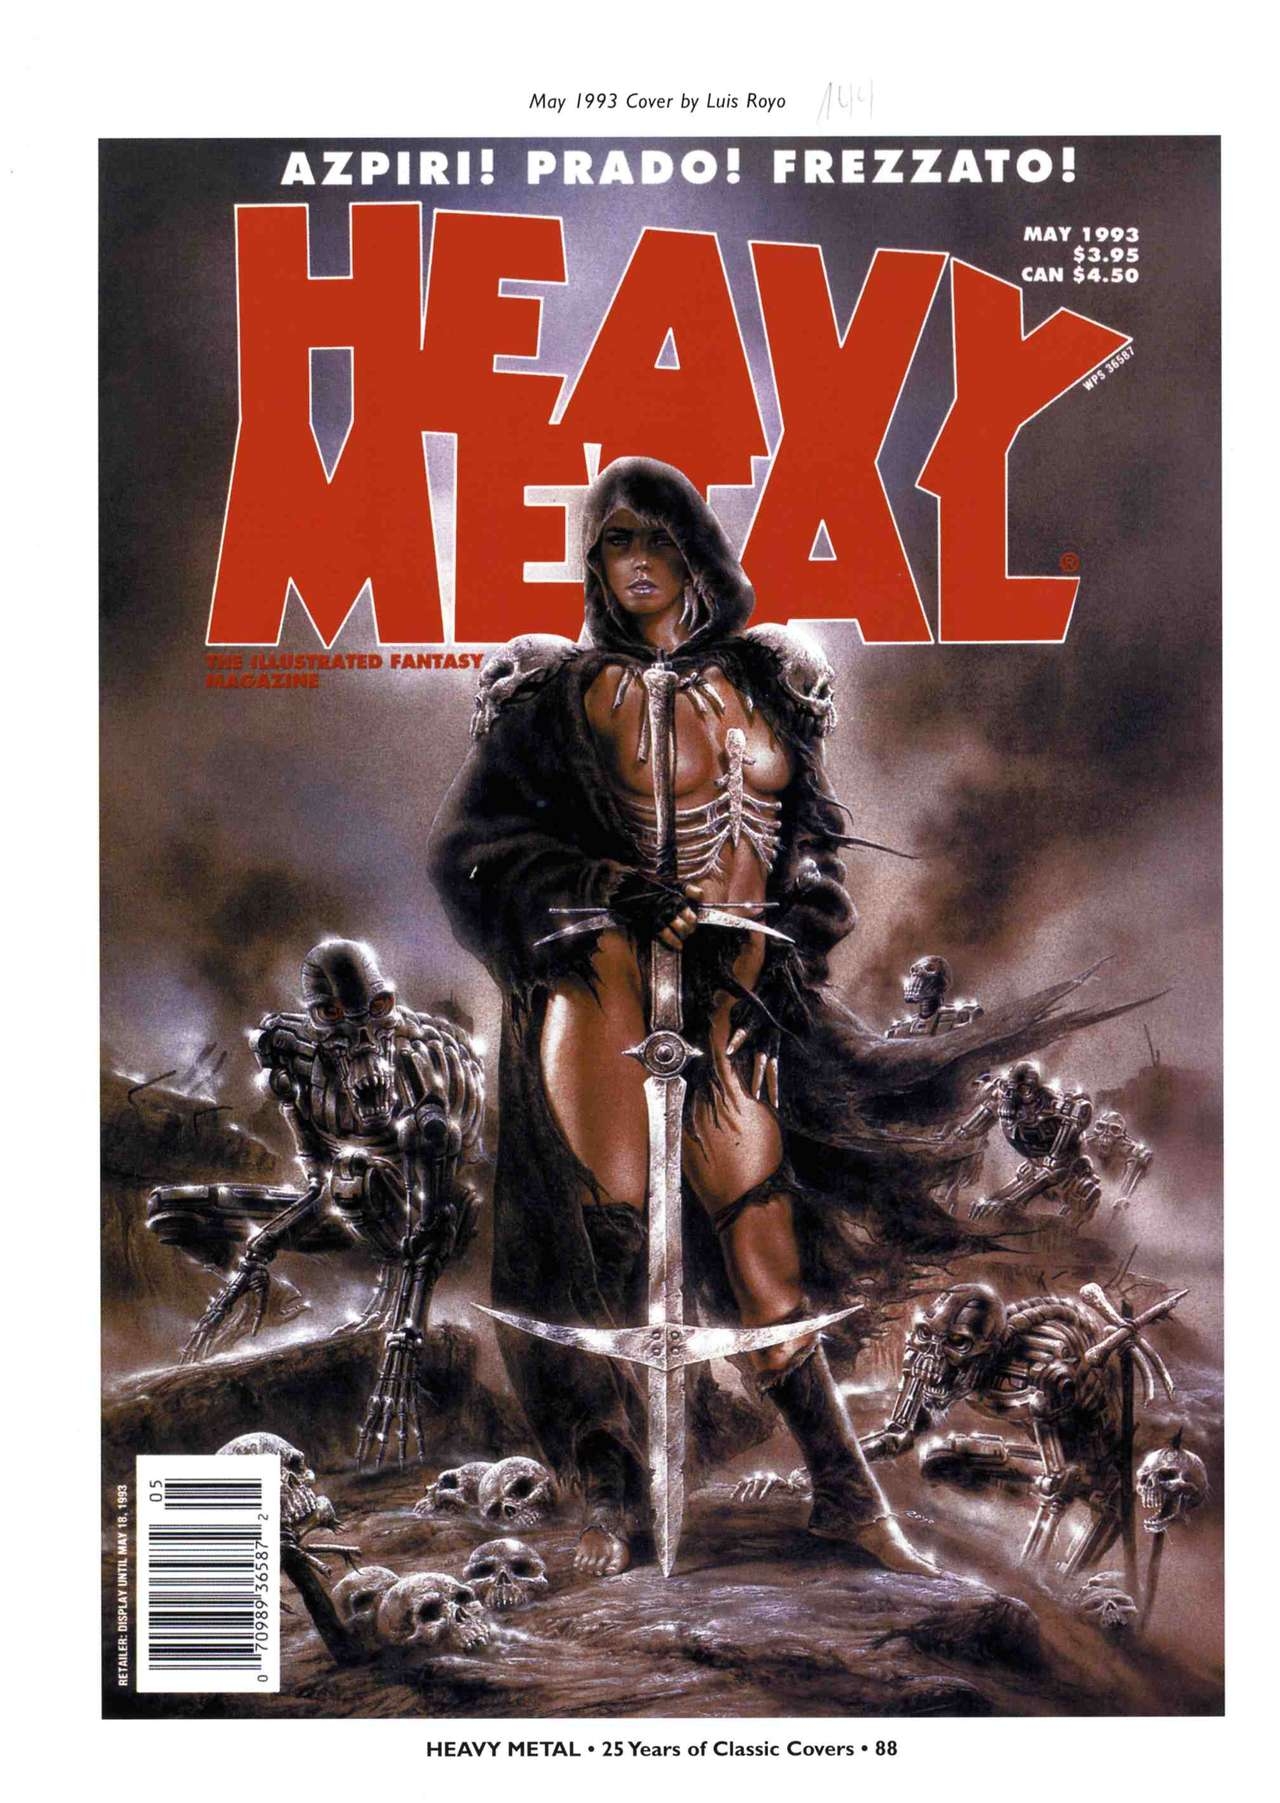 HEAVY METAL 25 Years of Classic Covers 93